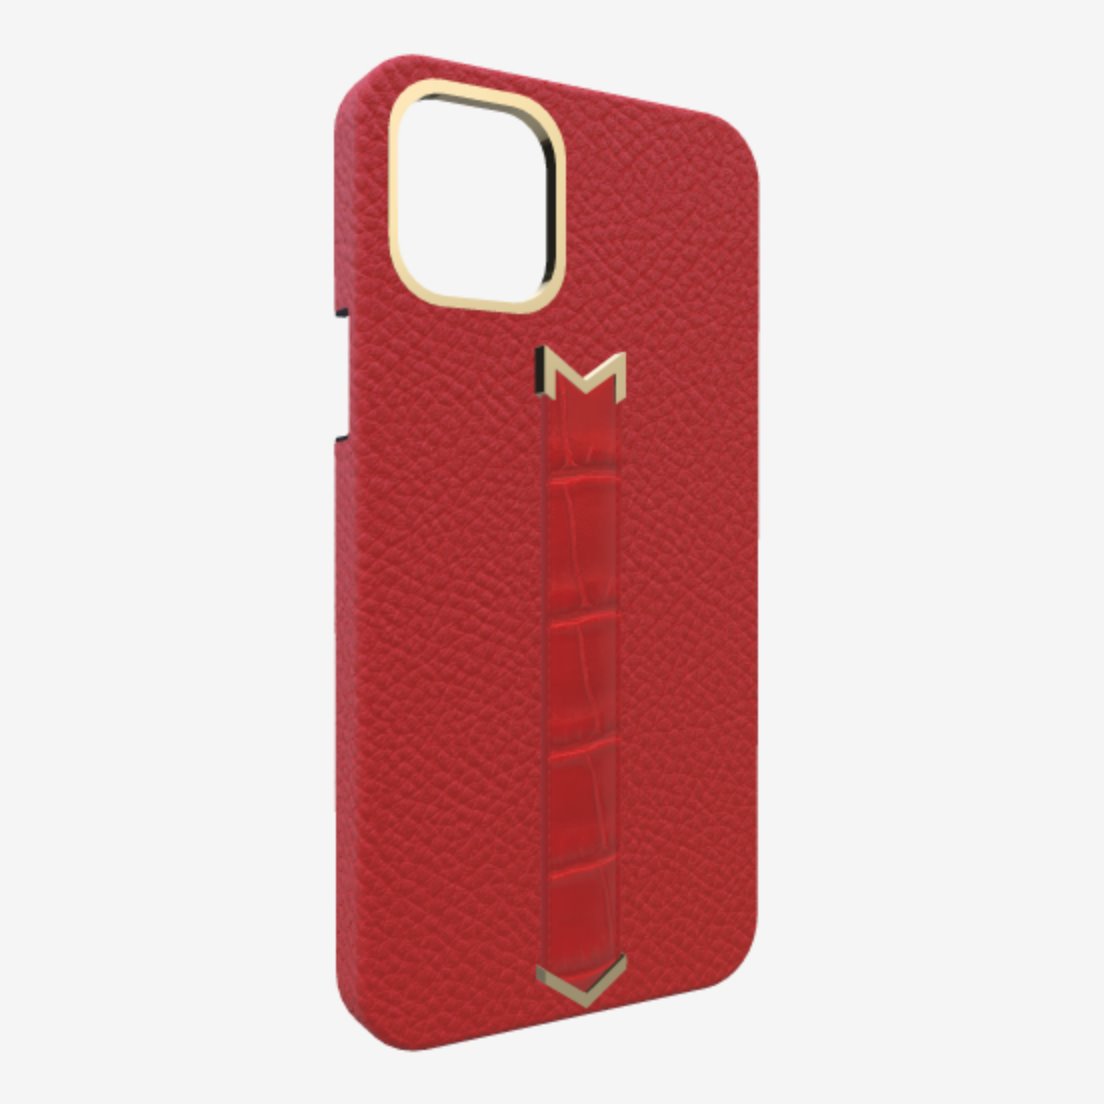 Gold Finger Strap Case for iPhone 13 in Genuine Calfskin and Alligator Glamour Red Glamour Red 